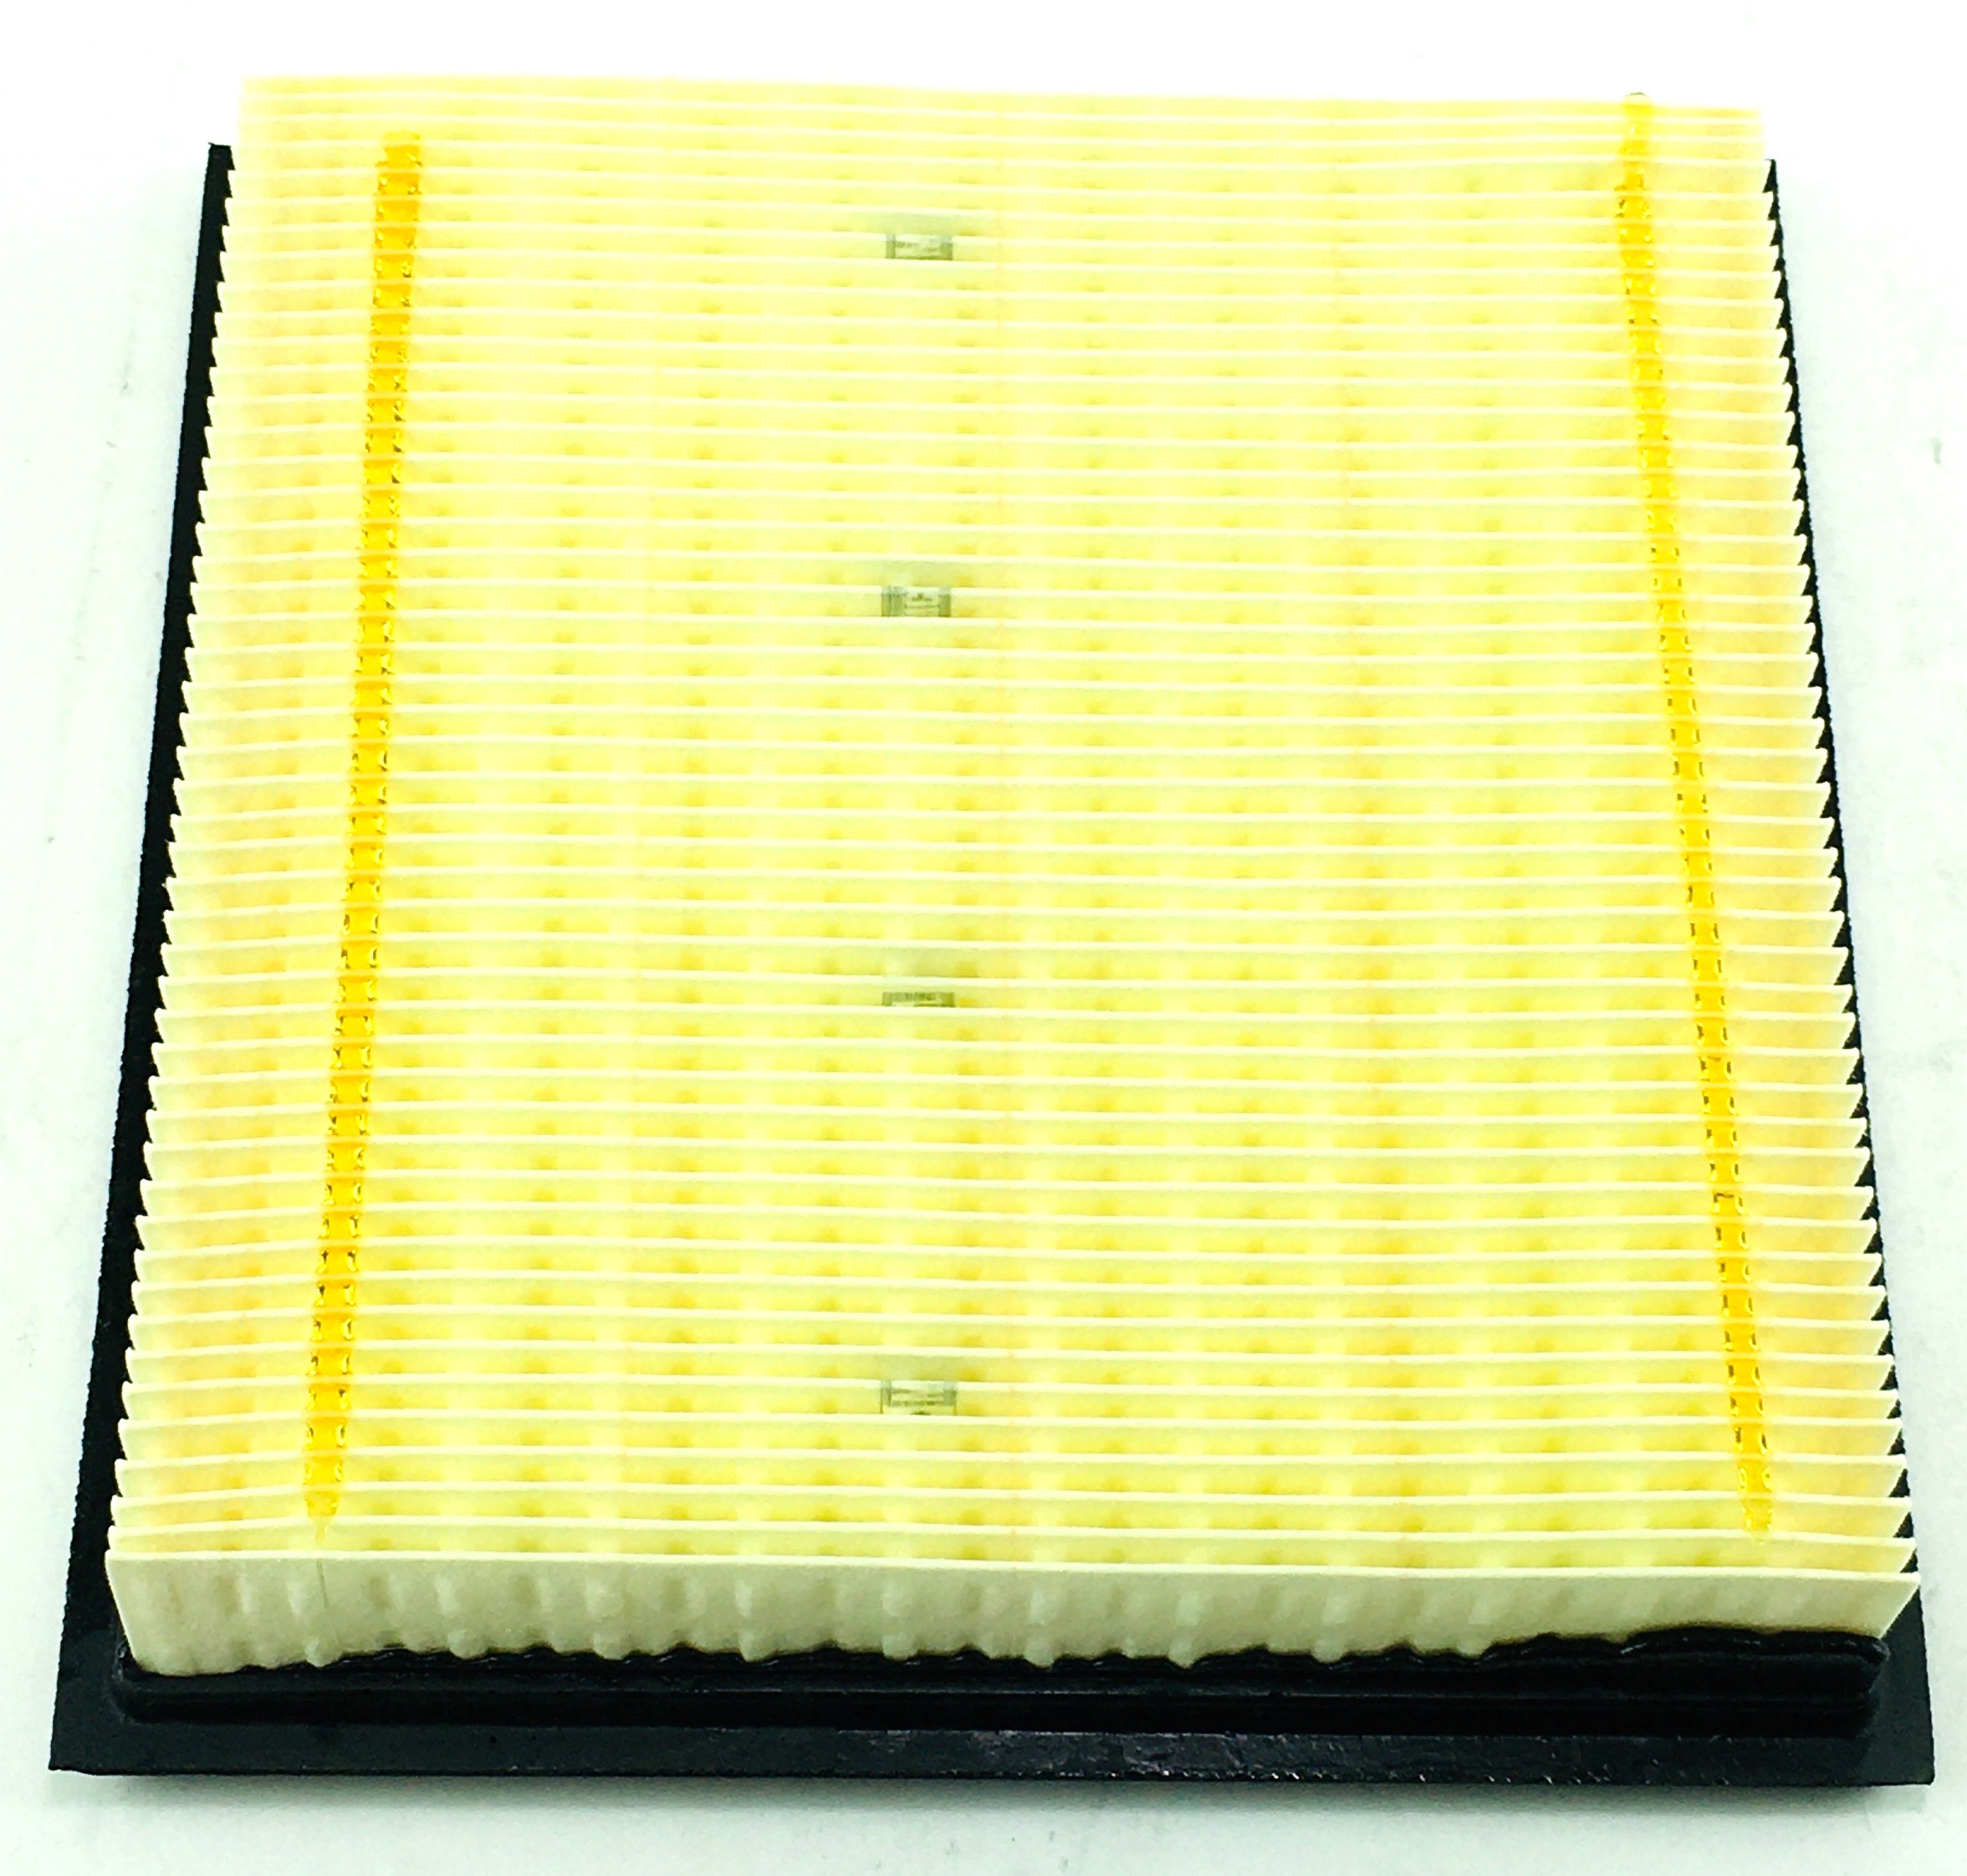 New OEM Motorcraft FA1883 Ford 7C3Z9601A Genuine Air Filter Free Shipping NIP - image 3